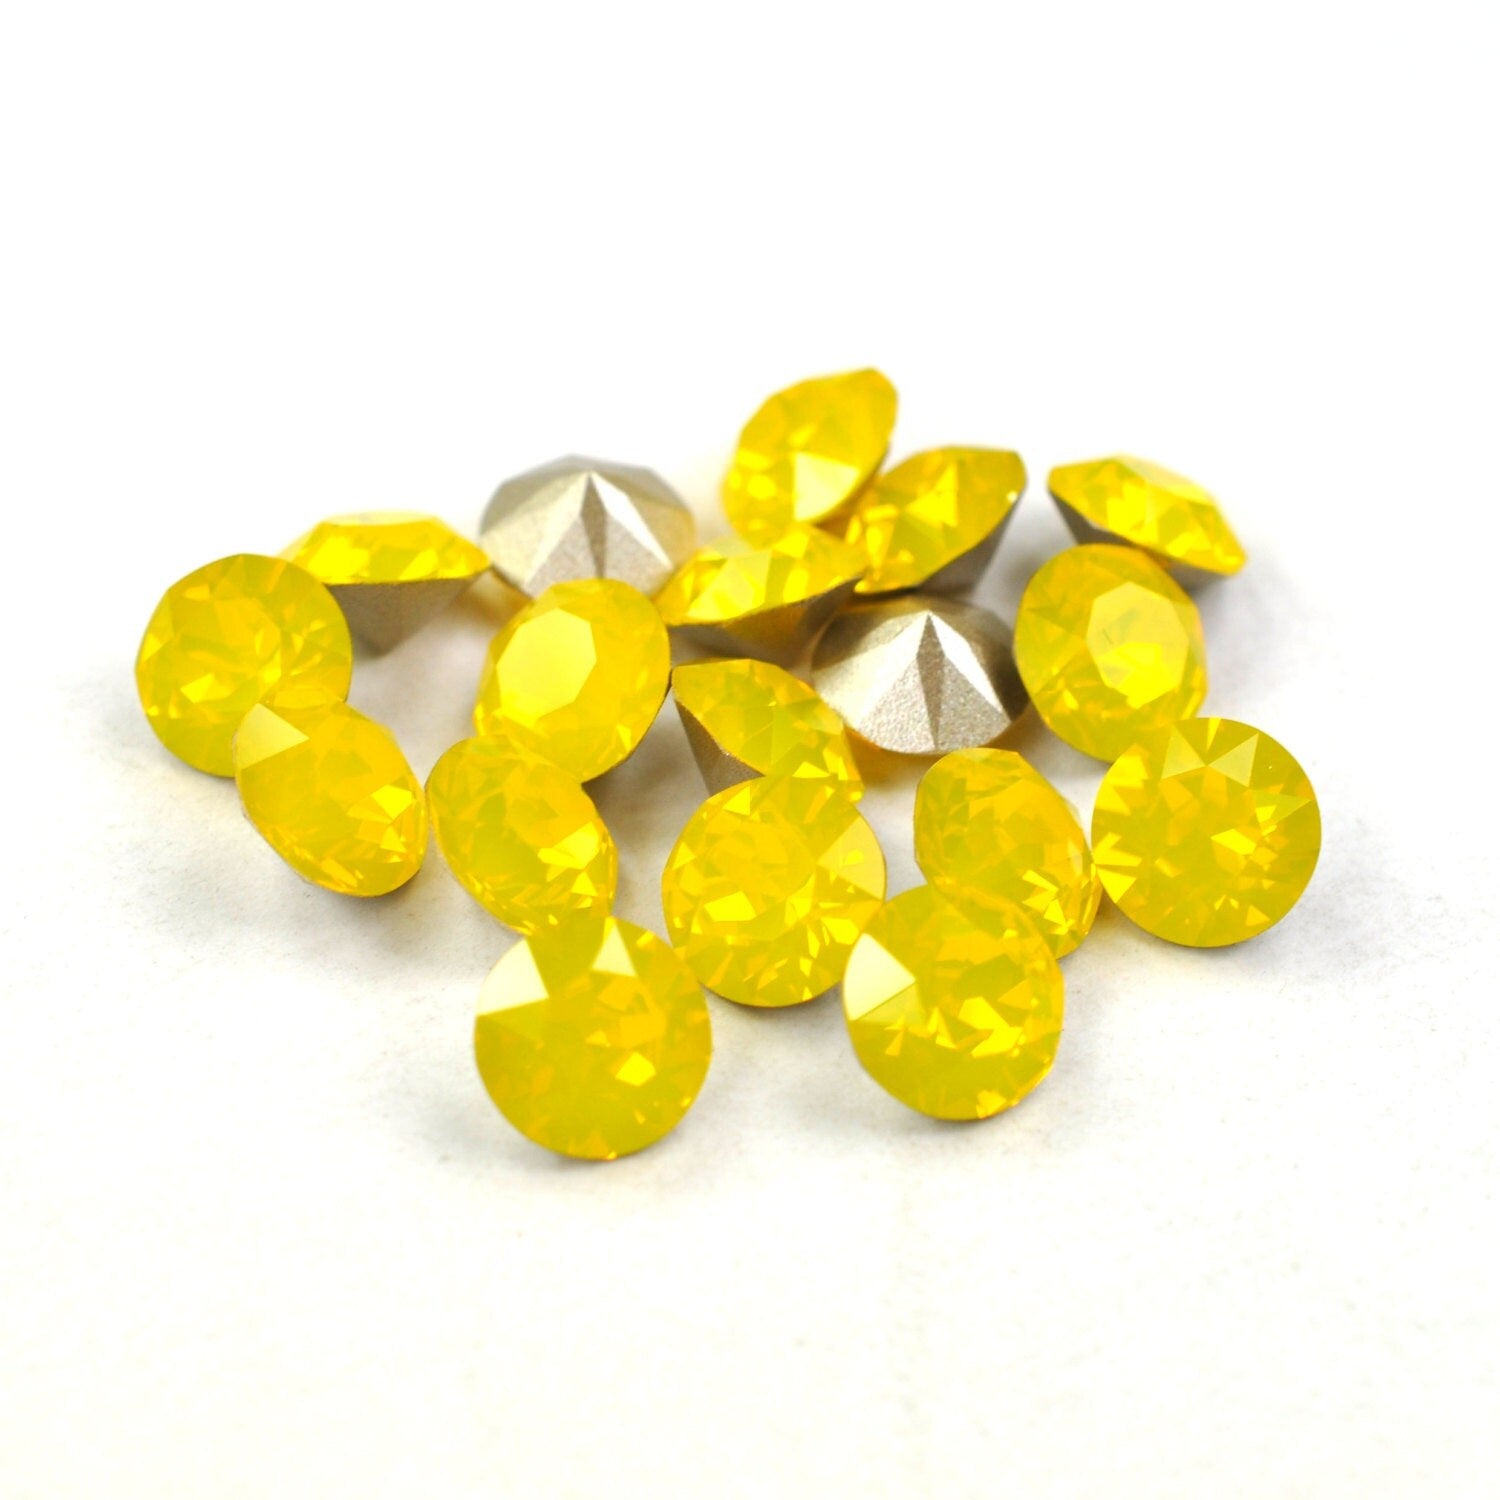 Yellow Opal 1088 Pointed Back Chaton Barton Crystal 39ss, 8mm